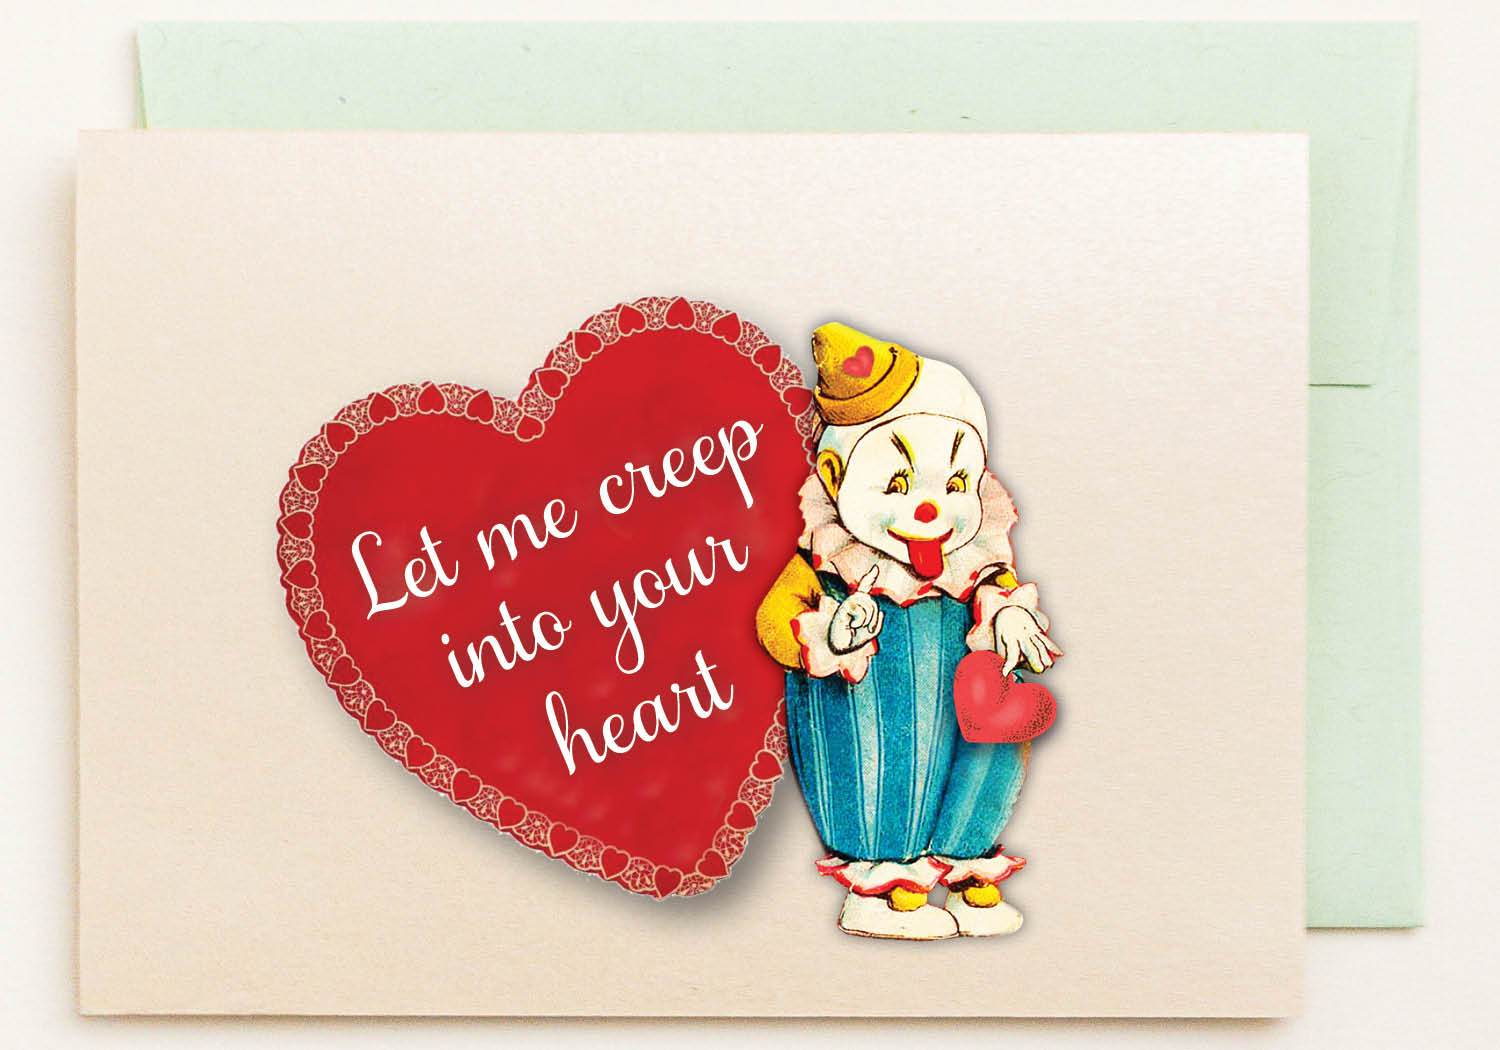 Hysterically Funny Creepy Clown Valentine's Day Card – Lilybranch